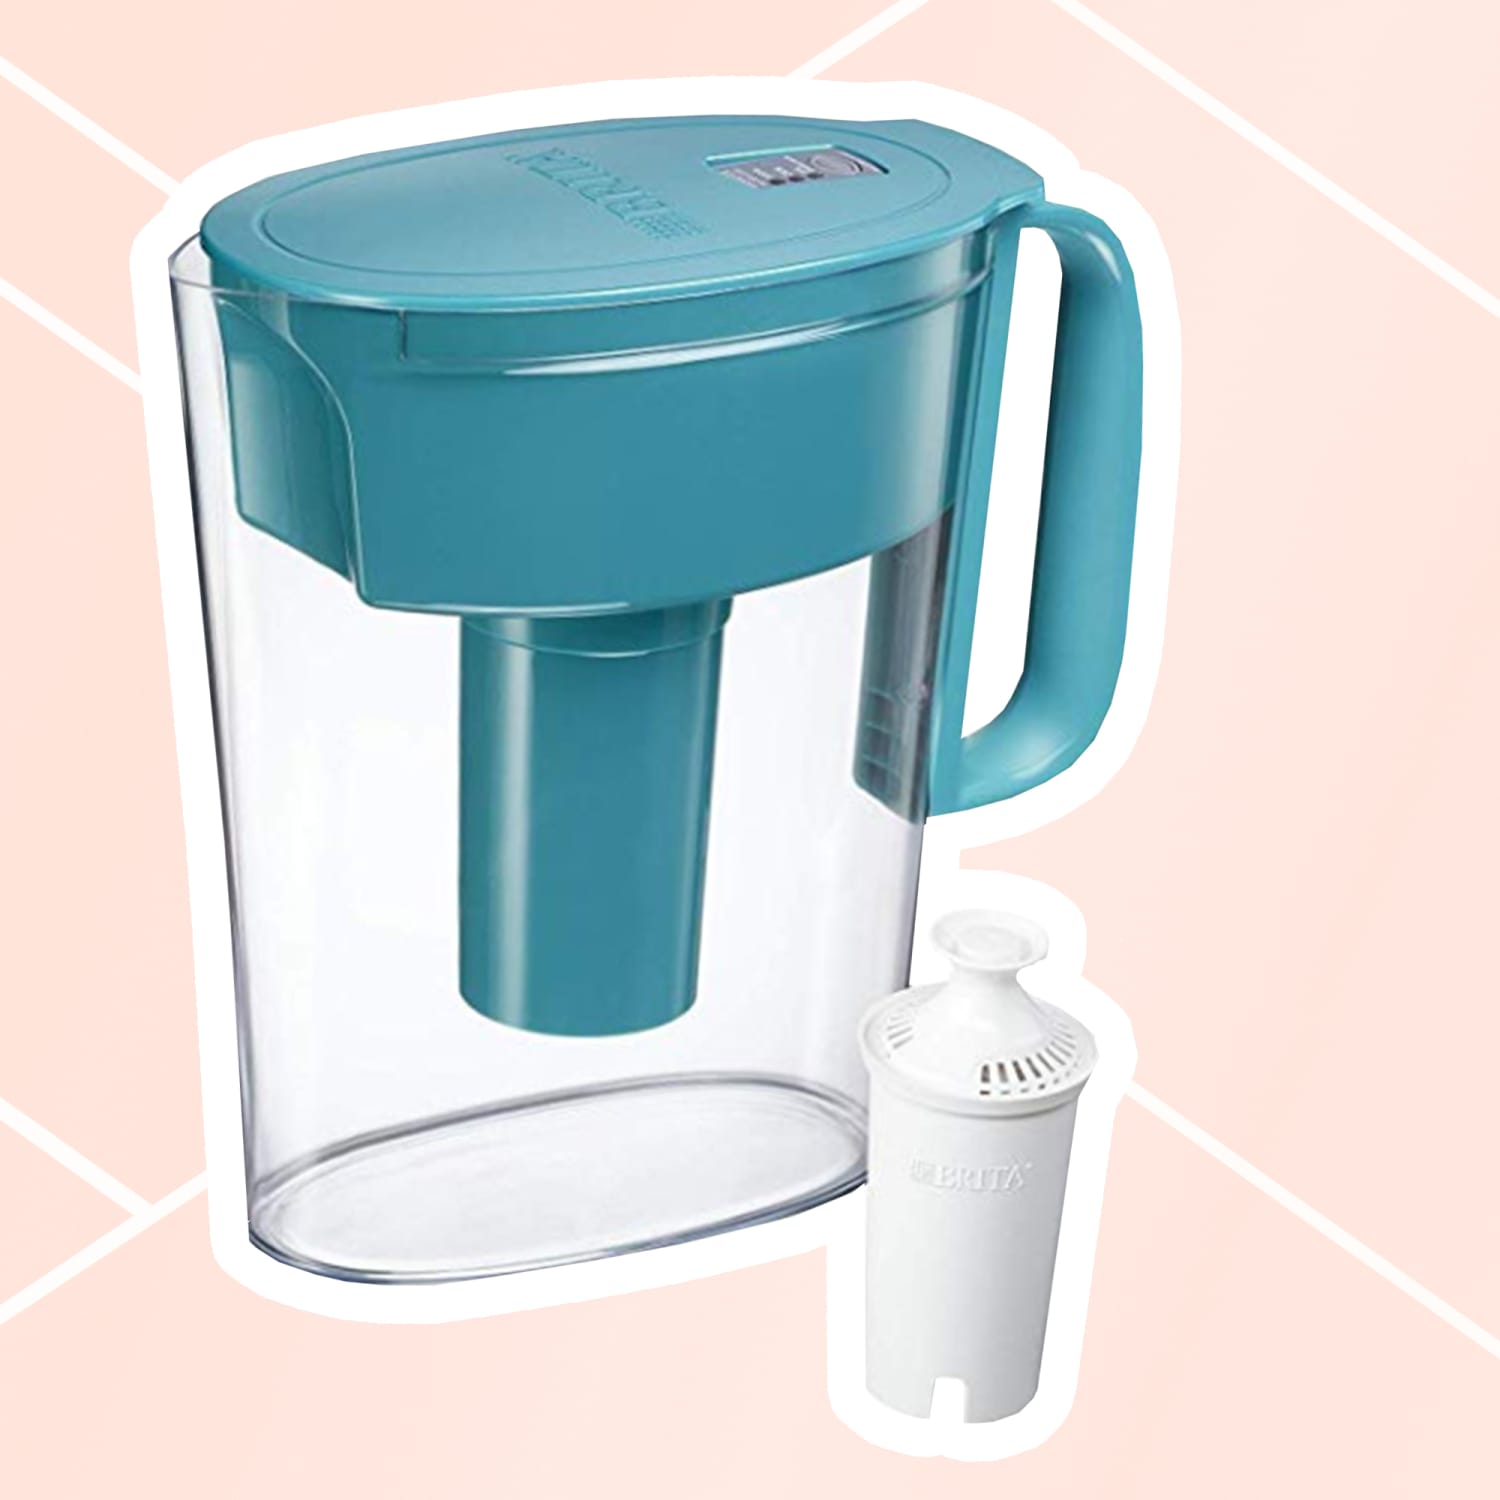 White Small Water Filter Pitcher Membrane Solutions 5 Cup Mini Size Jug Fast Filter and Pour for Fridge NSF Certified